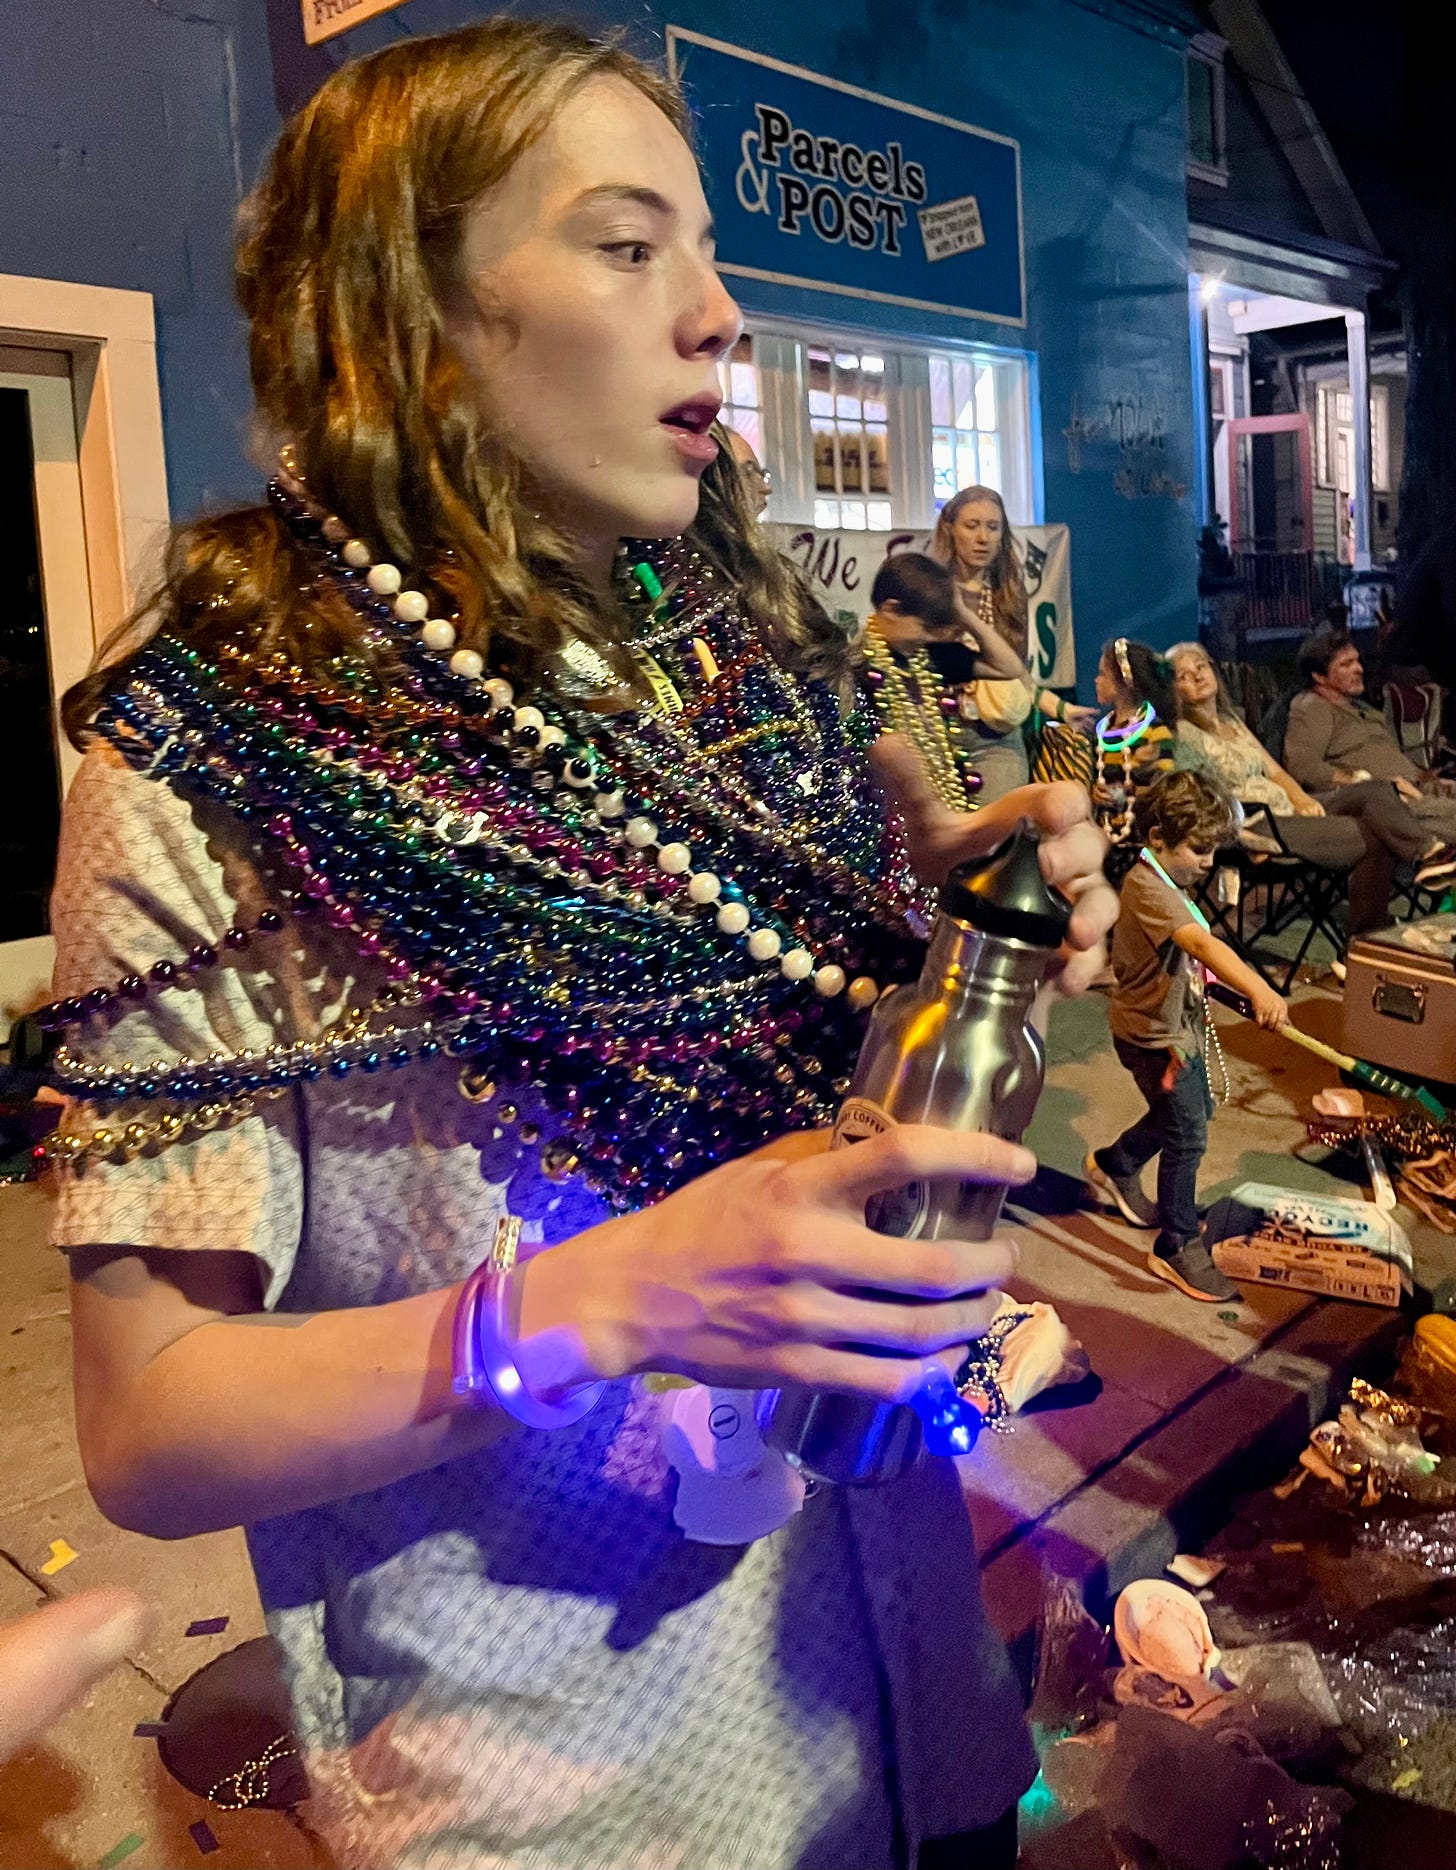 A teenager at a Mardi Gras parade wearing what looks to be a hundred strings of Mardi Gras beads around his neck, and flashing jewelry on his wrist. Other revelers sit, talk, and play in the background.